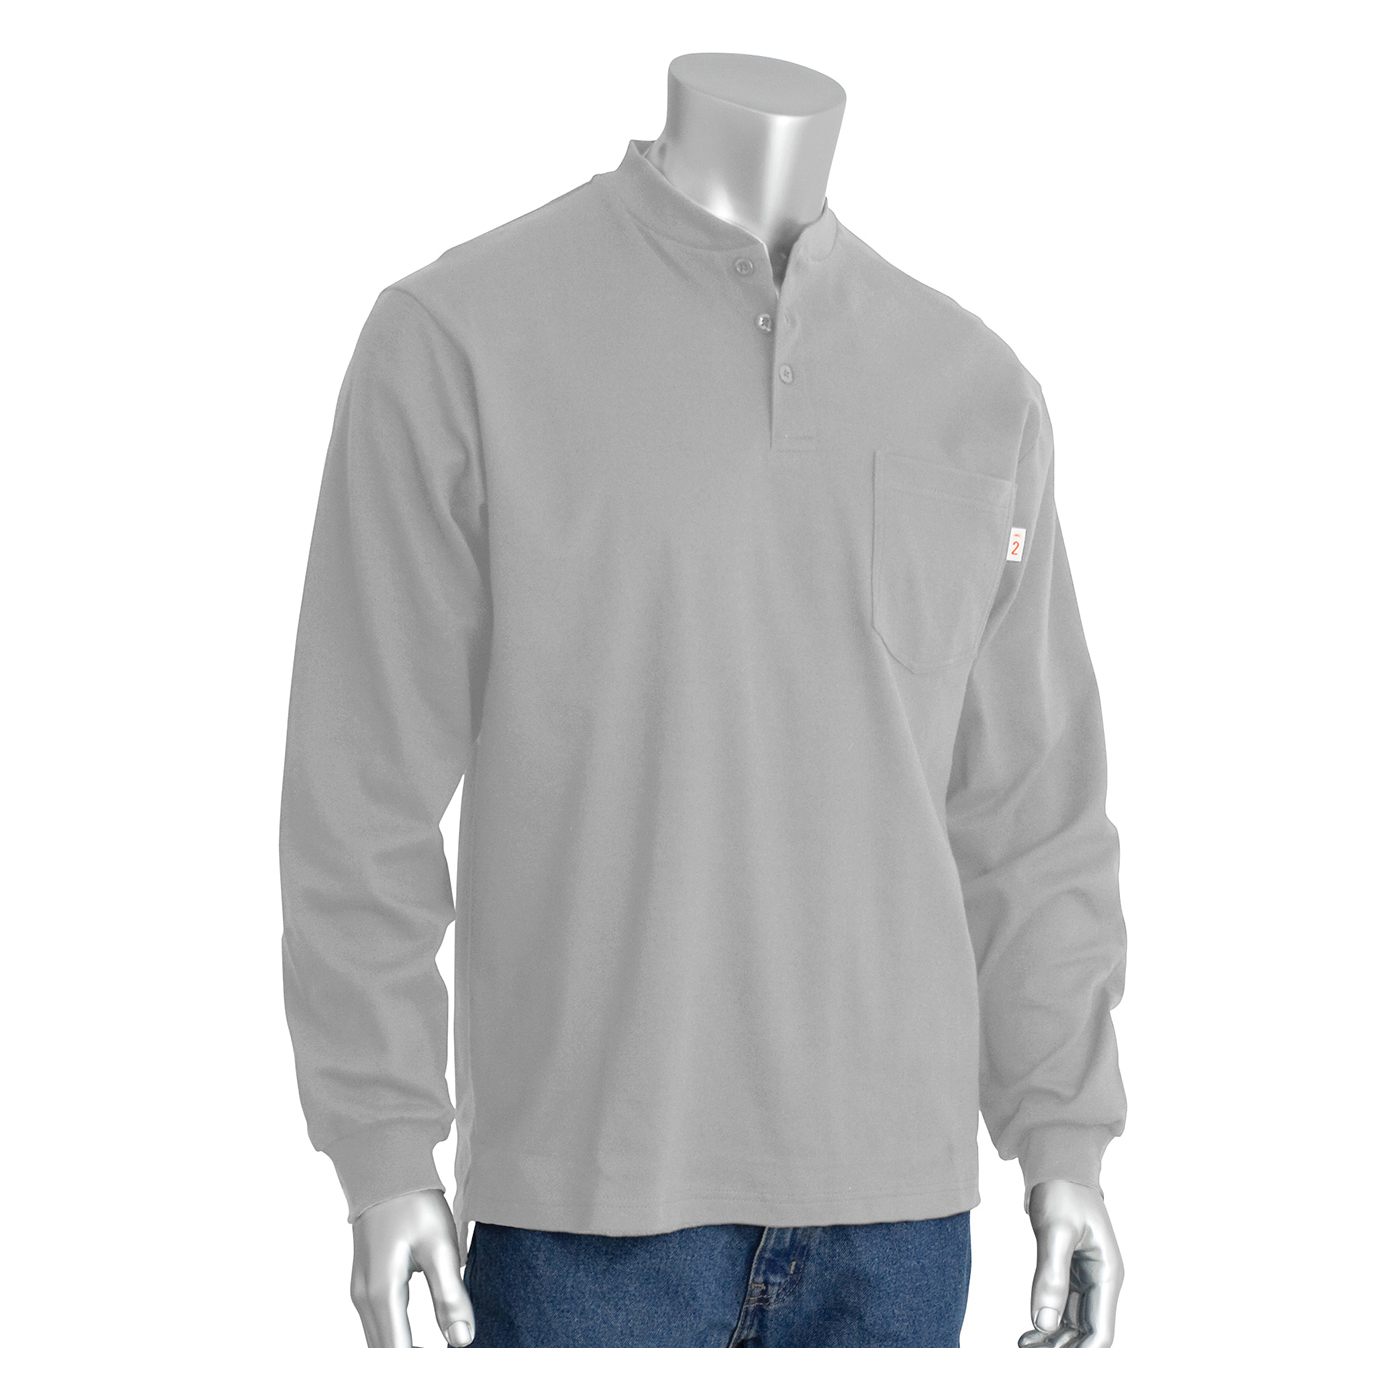 PIP® 385-FRHN-(LG)-M Arc and Flame-Resistant Long Sleeve Henley Shirt, M, Light Gray, Cotton Interlock Knit, 30 in L